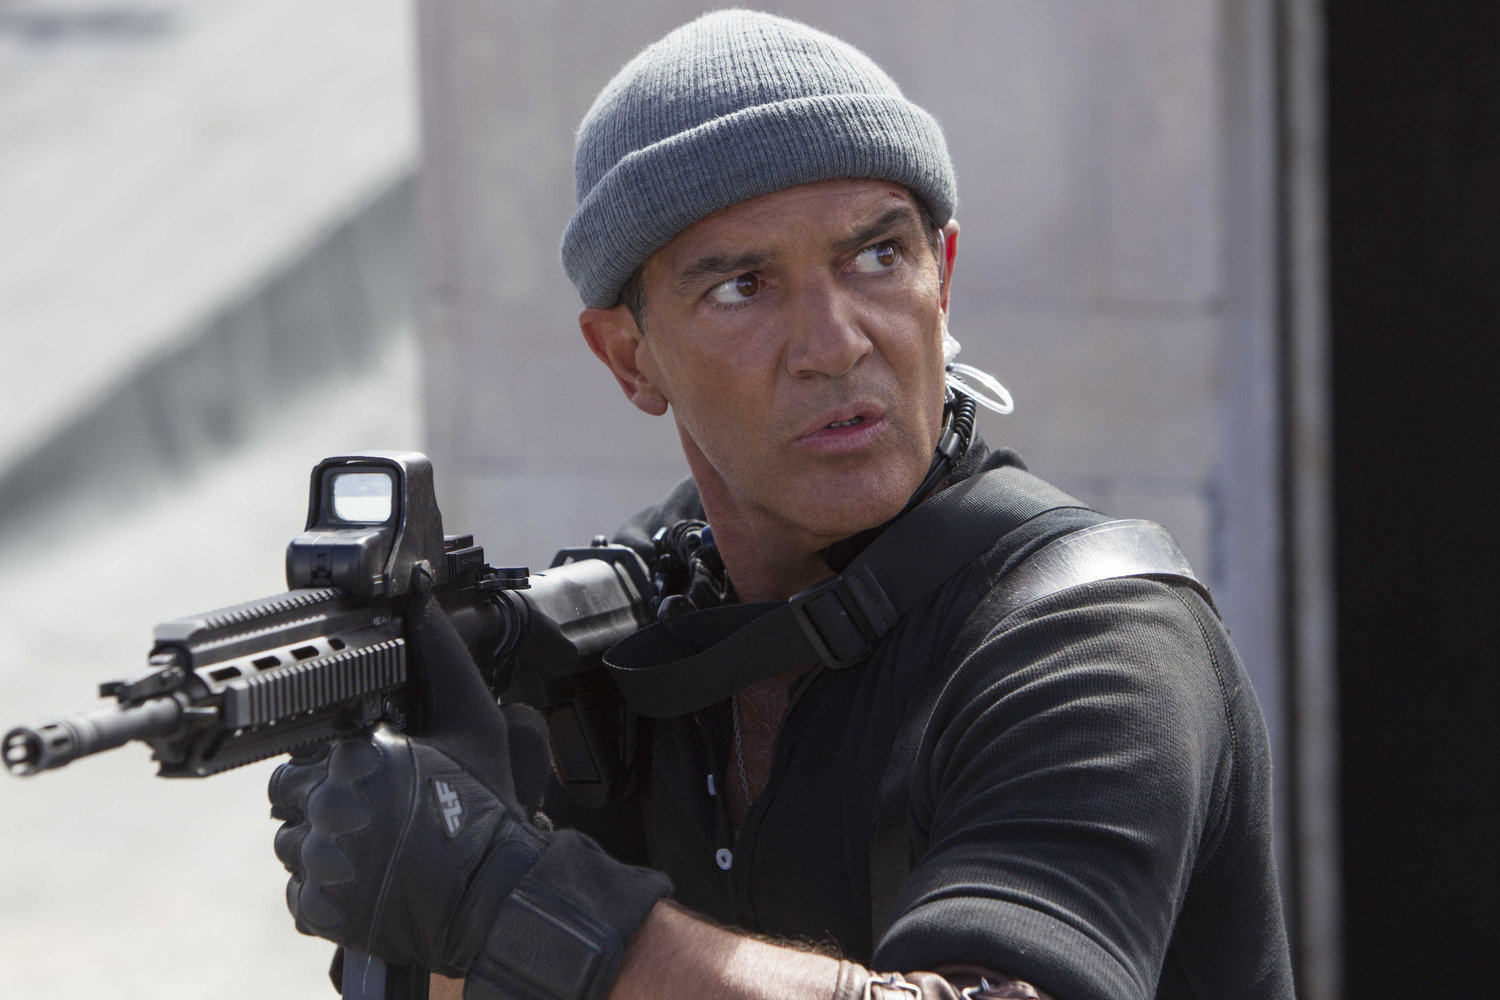 expendables-3-the-expendables-3-20-08-2014-23-g.jpg